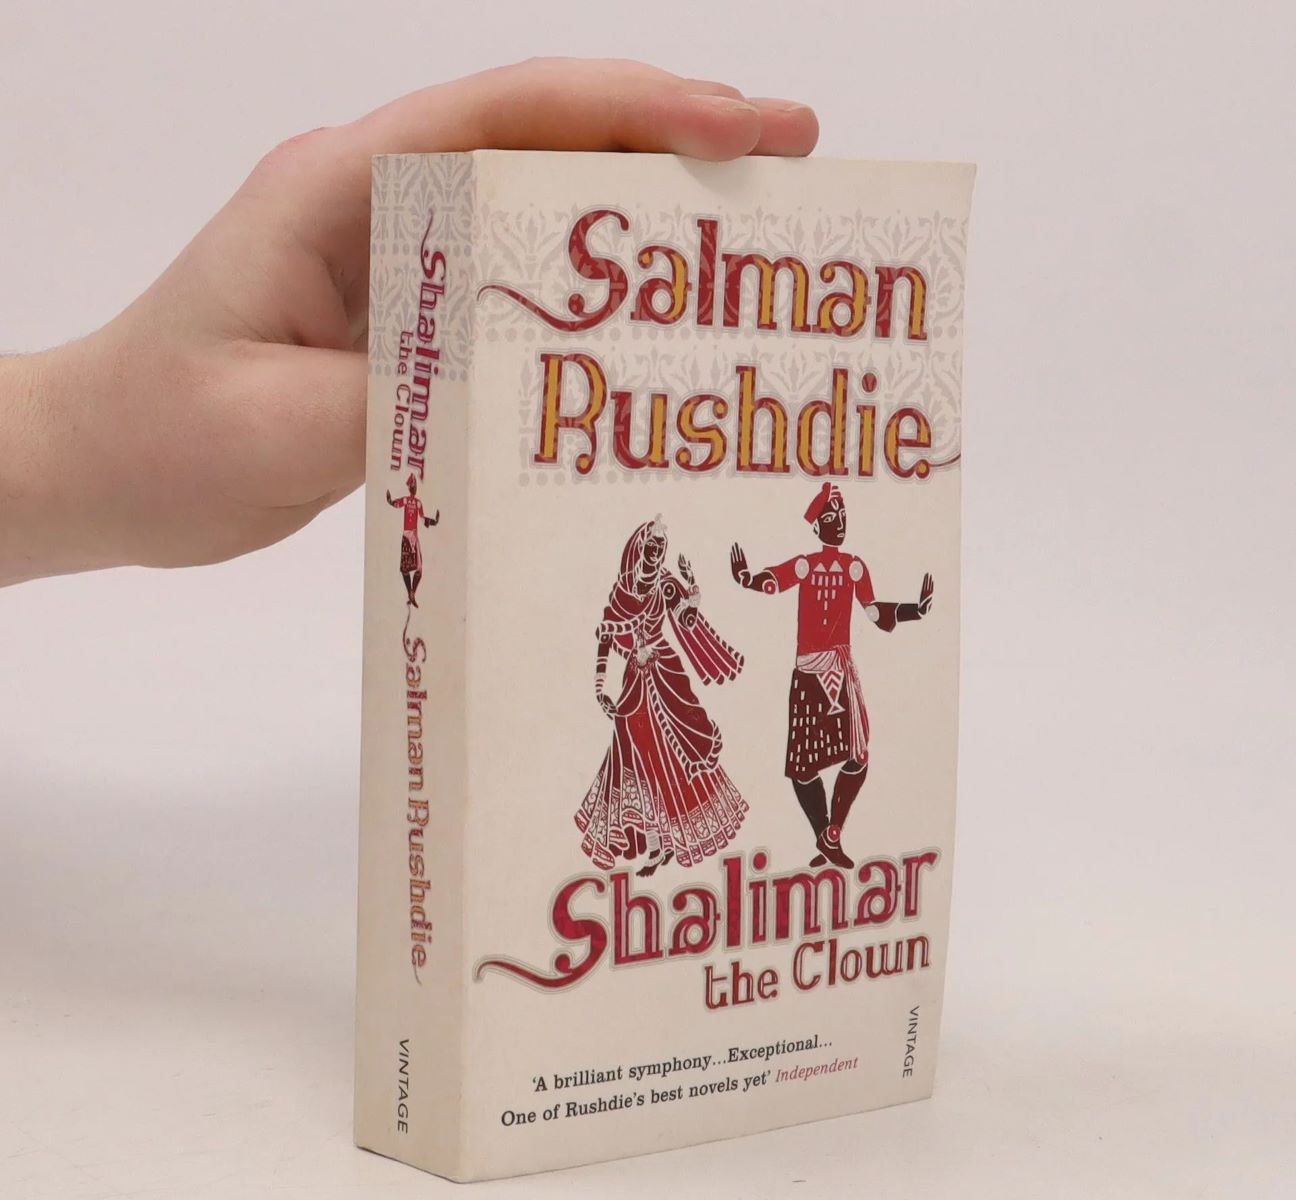 13-mind-blowing-facts-about-shalimar-the-clown-salman-rushdie